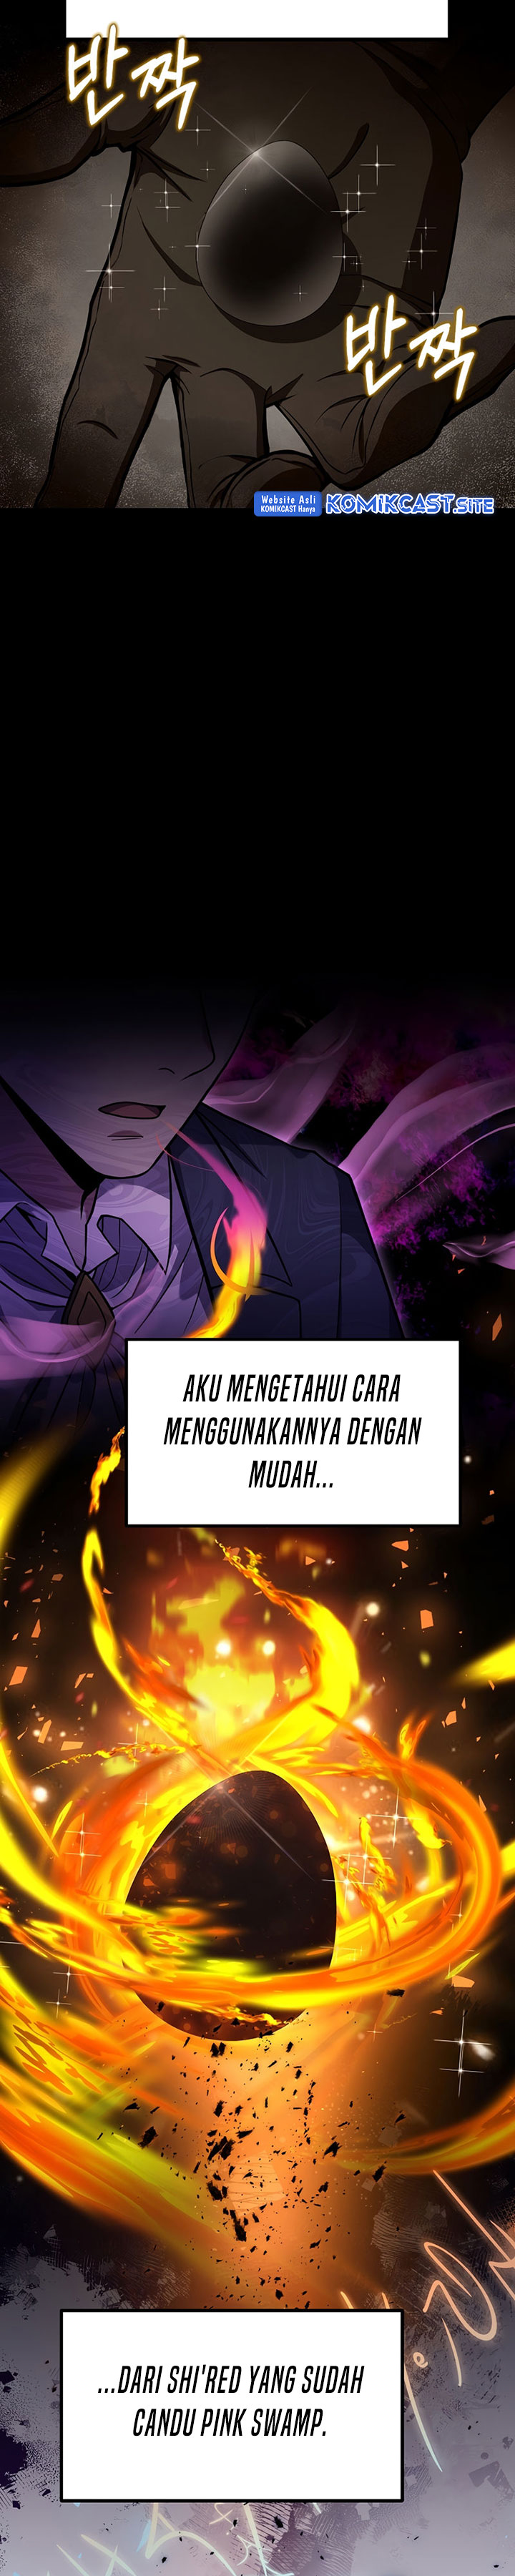 rebirth-of-the-8-circled-mage-indo Chapter 125